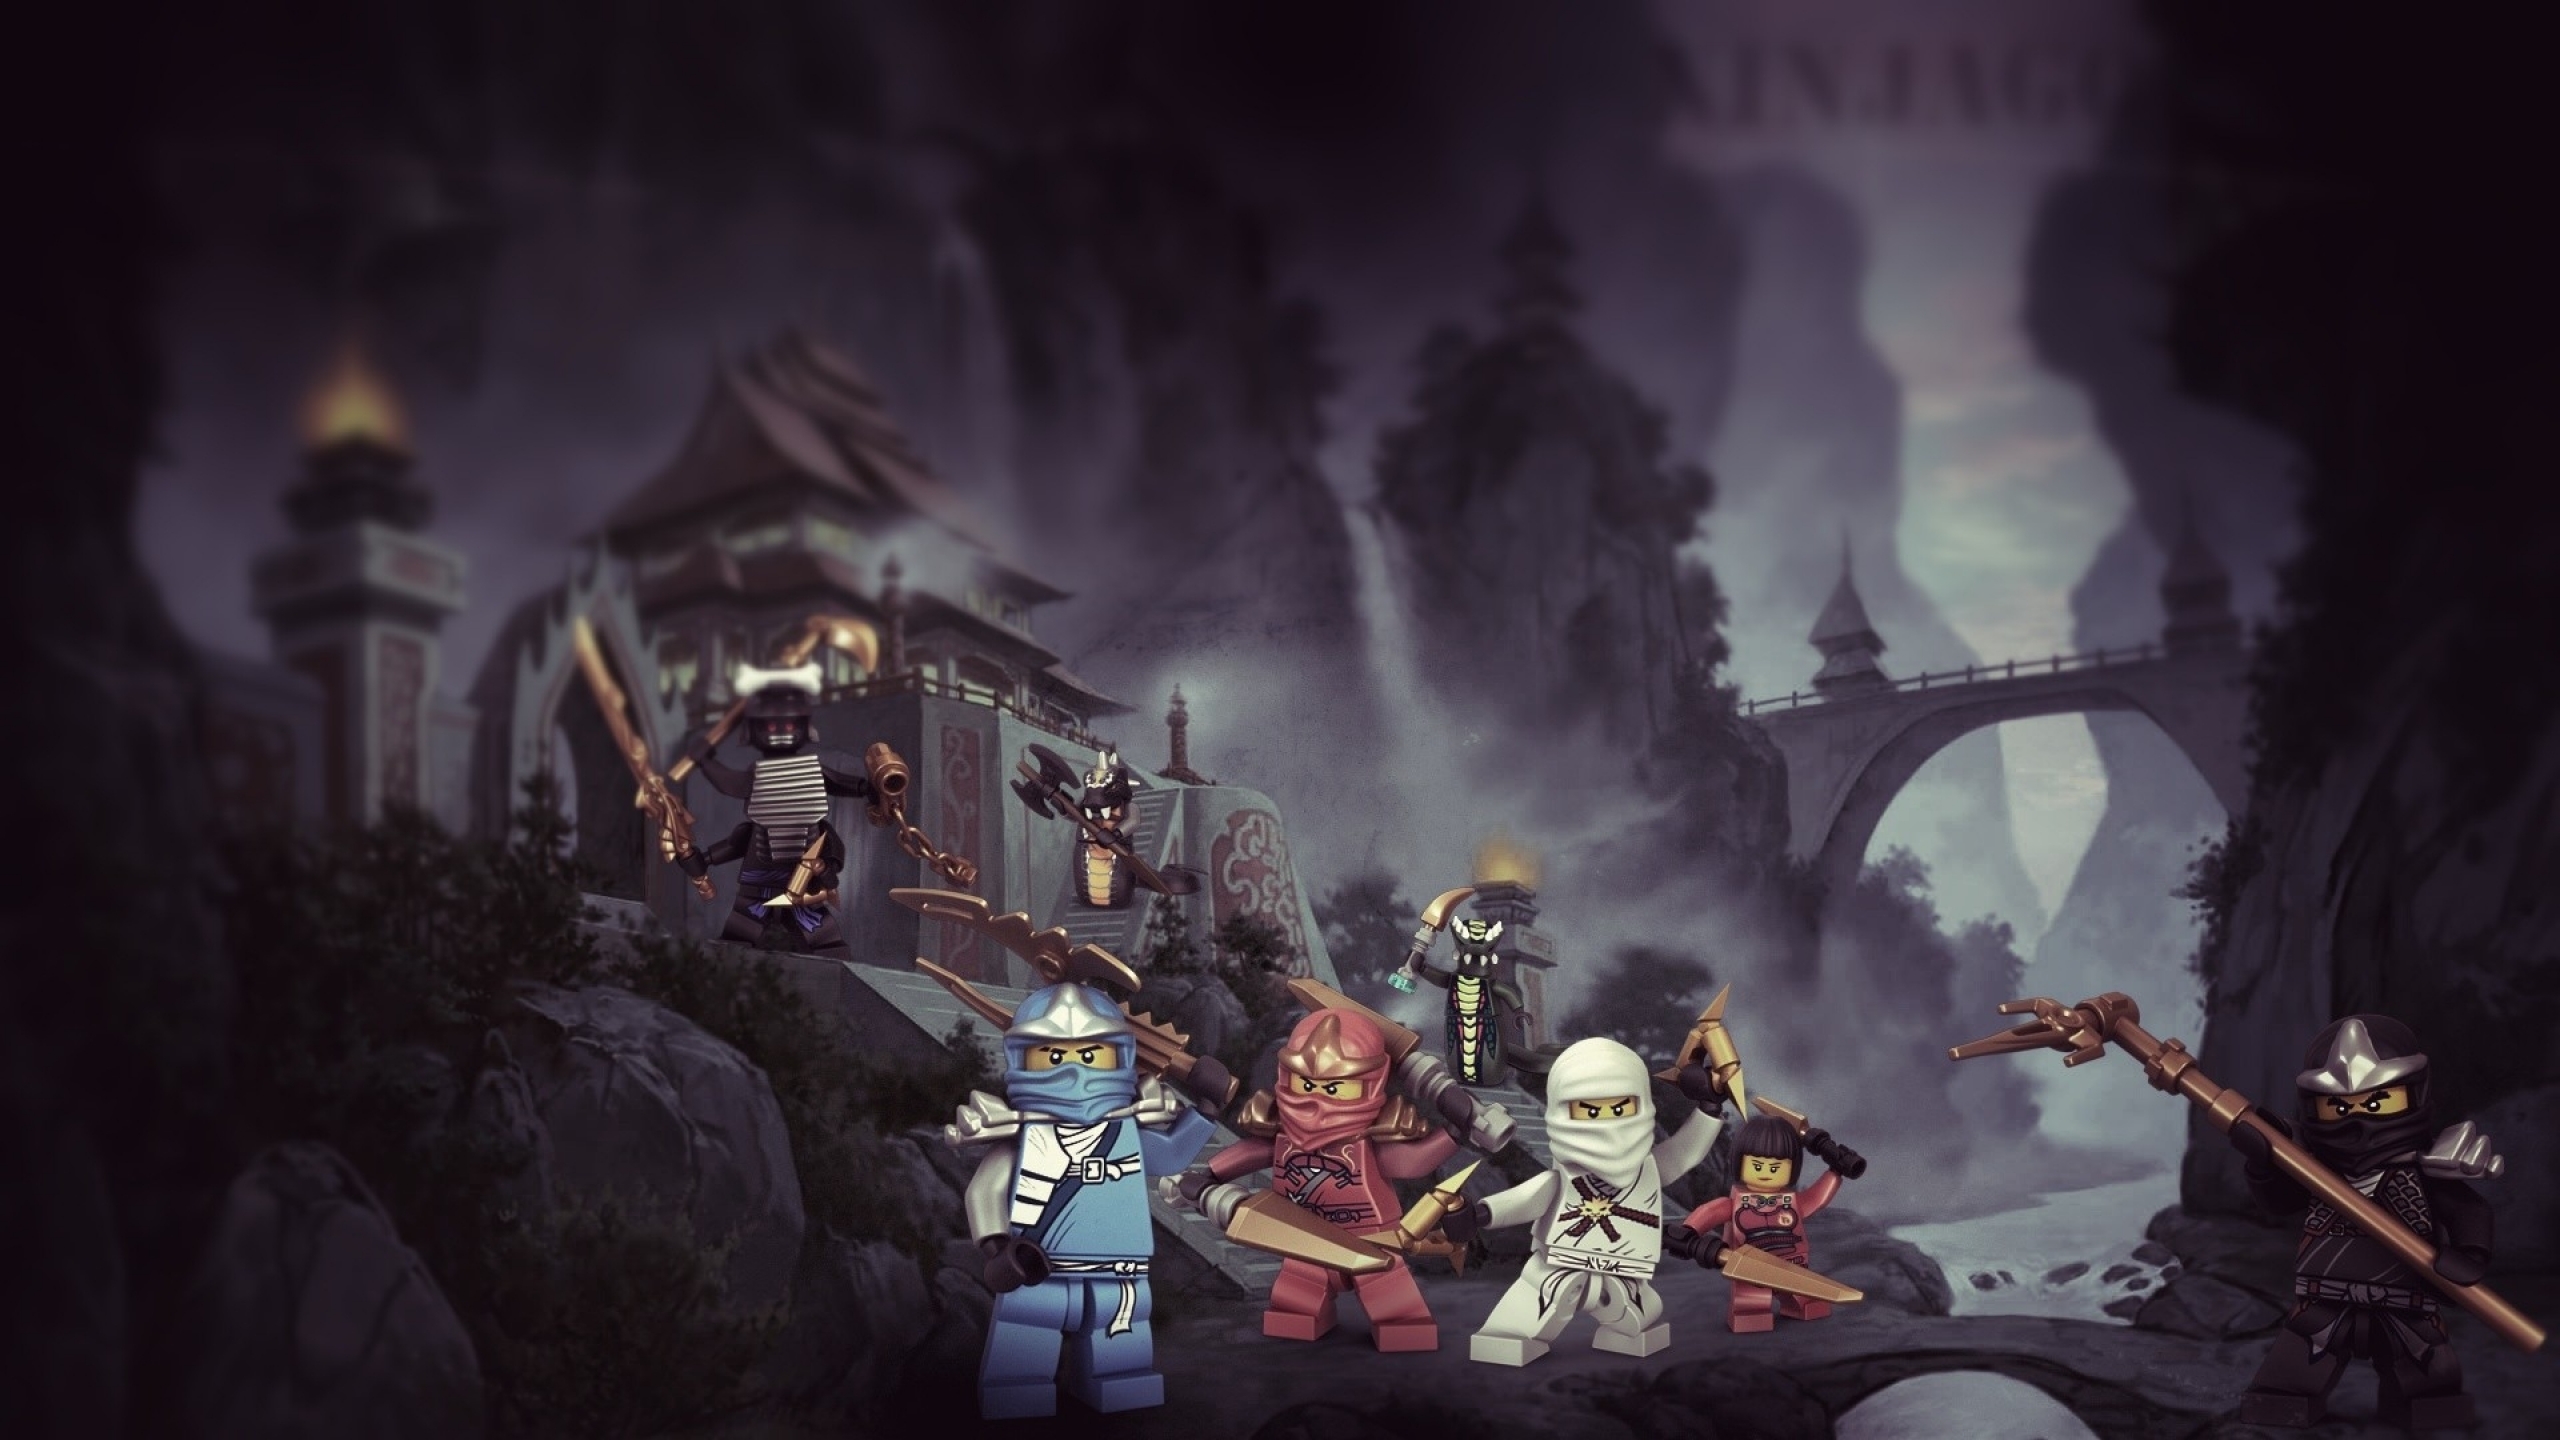 Related image with Ninjago Wallpaper For Computer 2560x1440